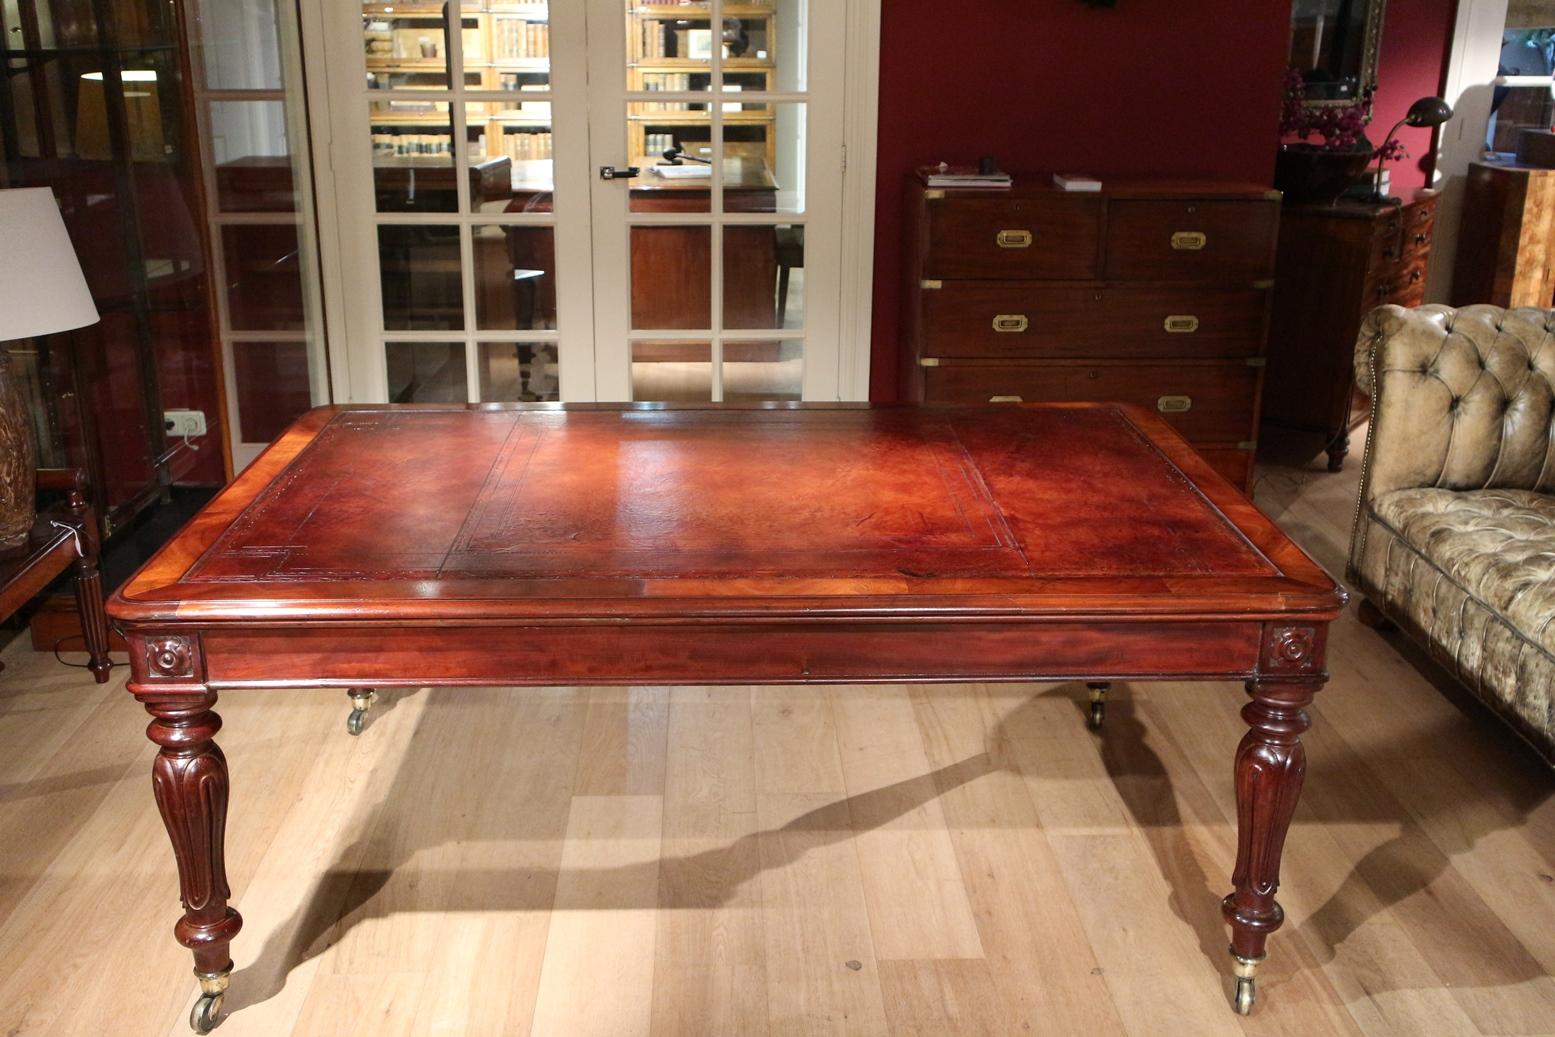 Beautiful antique William IV library desk. Warm mahogany color. Leather is hand-colored leather with blind tooling. Crossbanded top. Table is in perfect condition. Nice and useful pure antique piece of furniture.

Origin: England

Period: